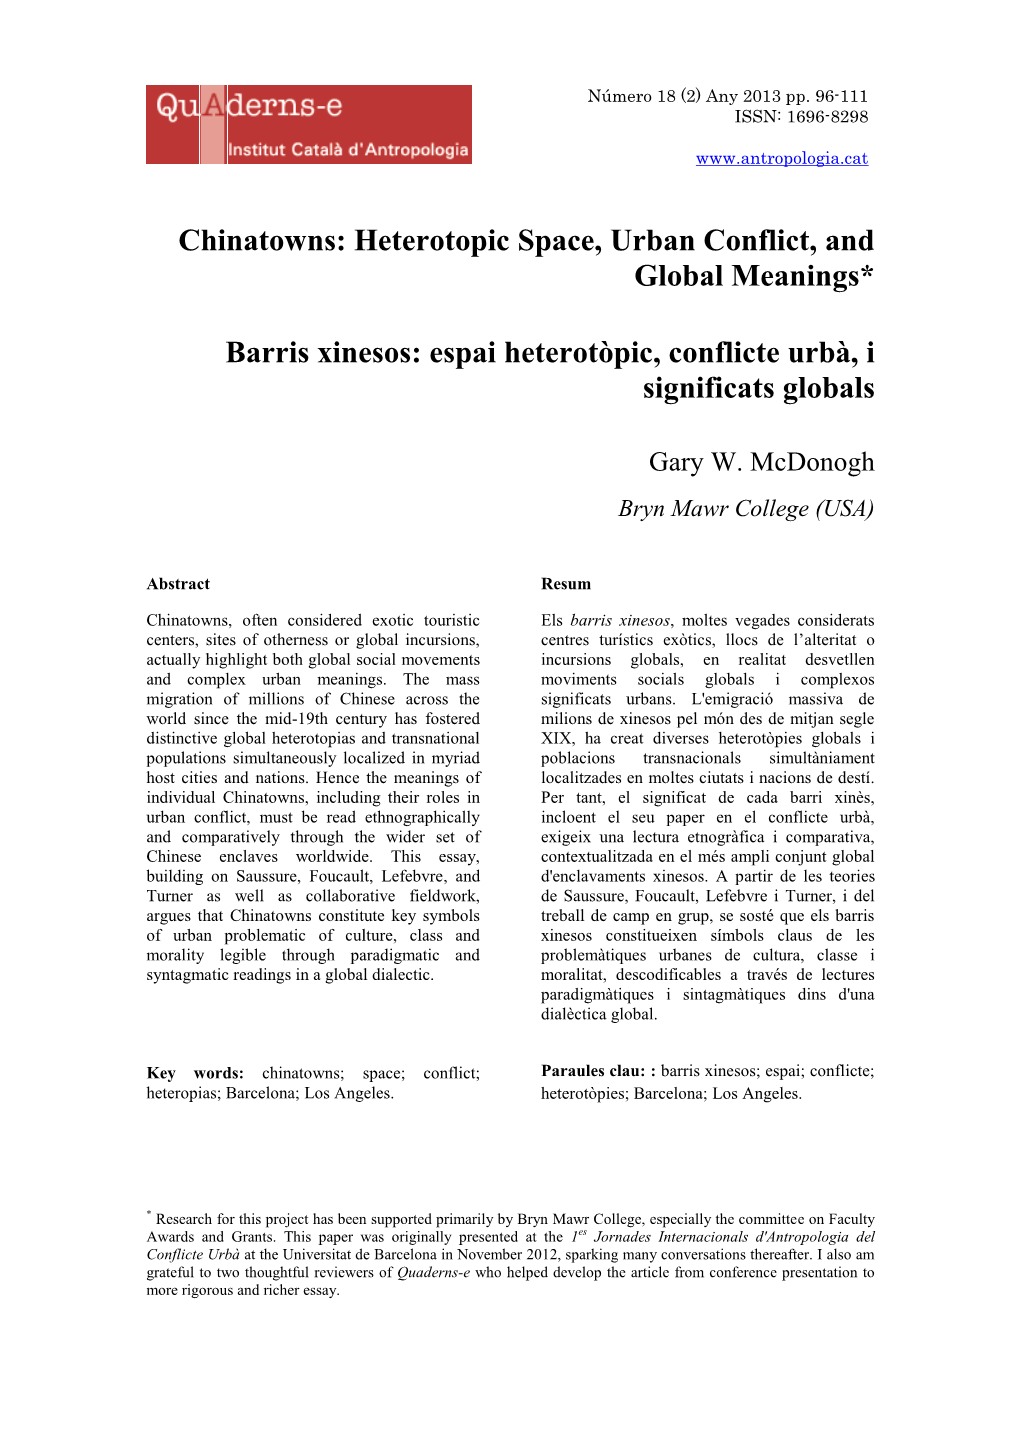 Chinatowns: Heterotopic Space, Urban Conflict, and Global Meanings*